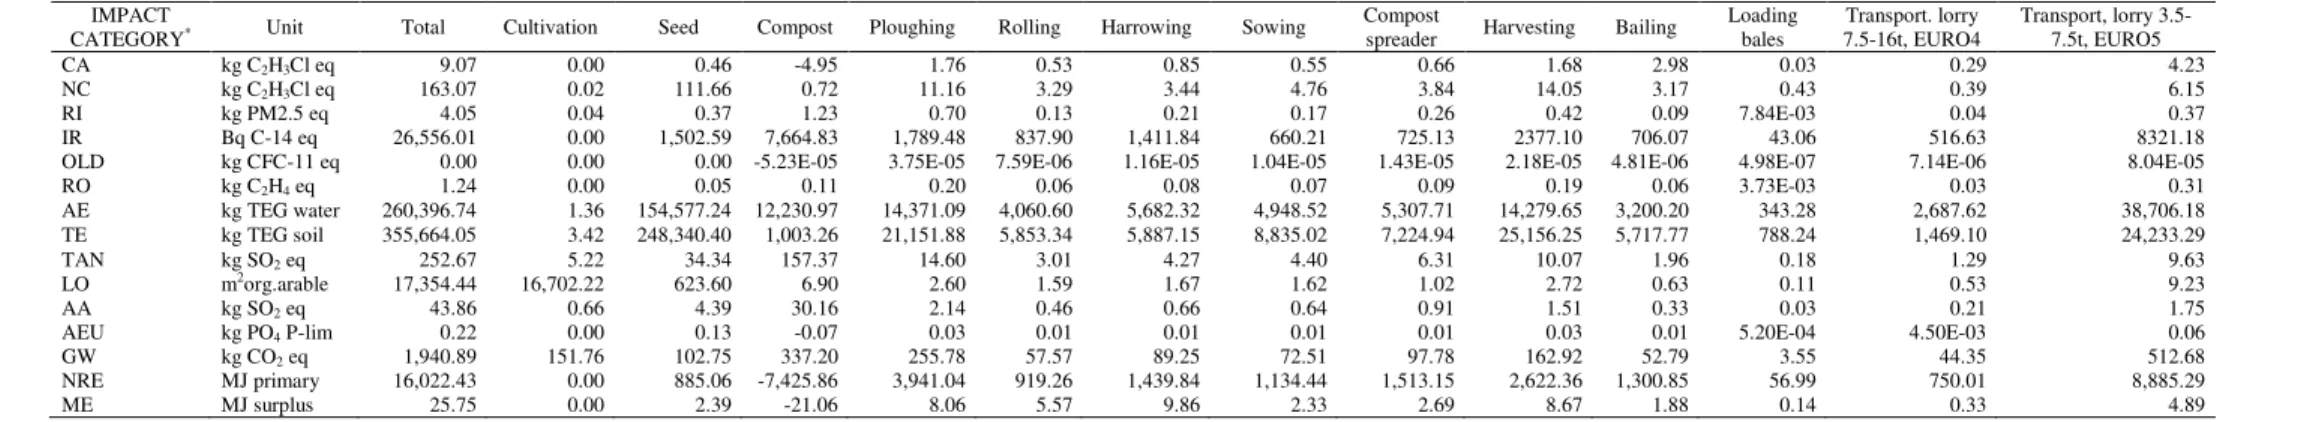 Table 17.  Characterization per impact category for organic barley cultivation processes (with reference to 1ha FU)